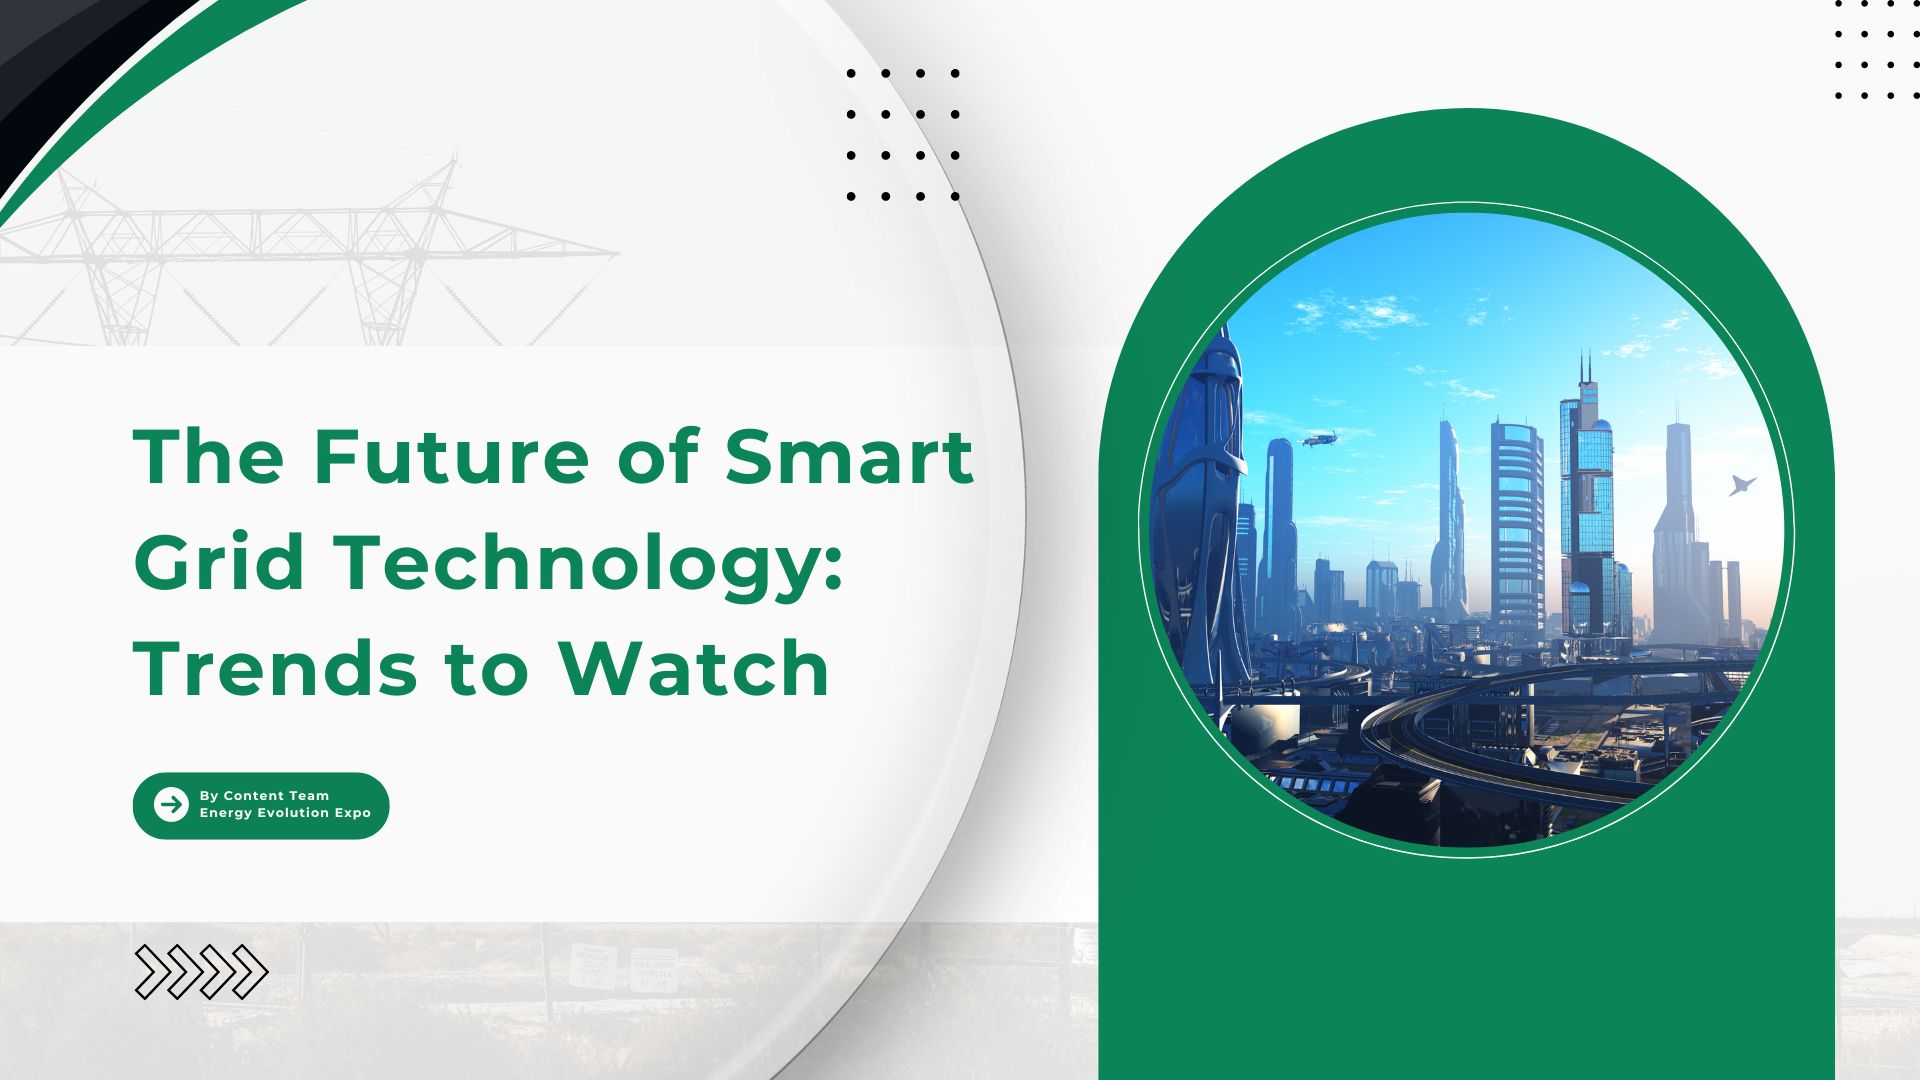 The Future of Smart Grid Technology: Trends to Watch